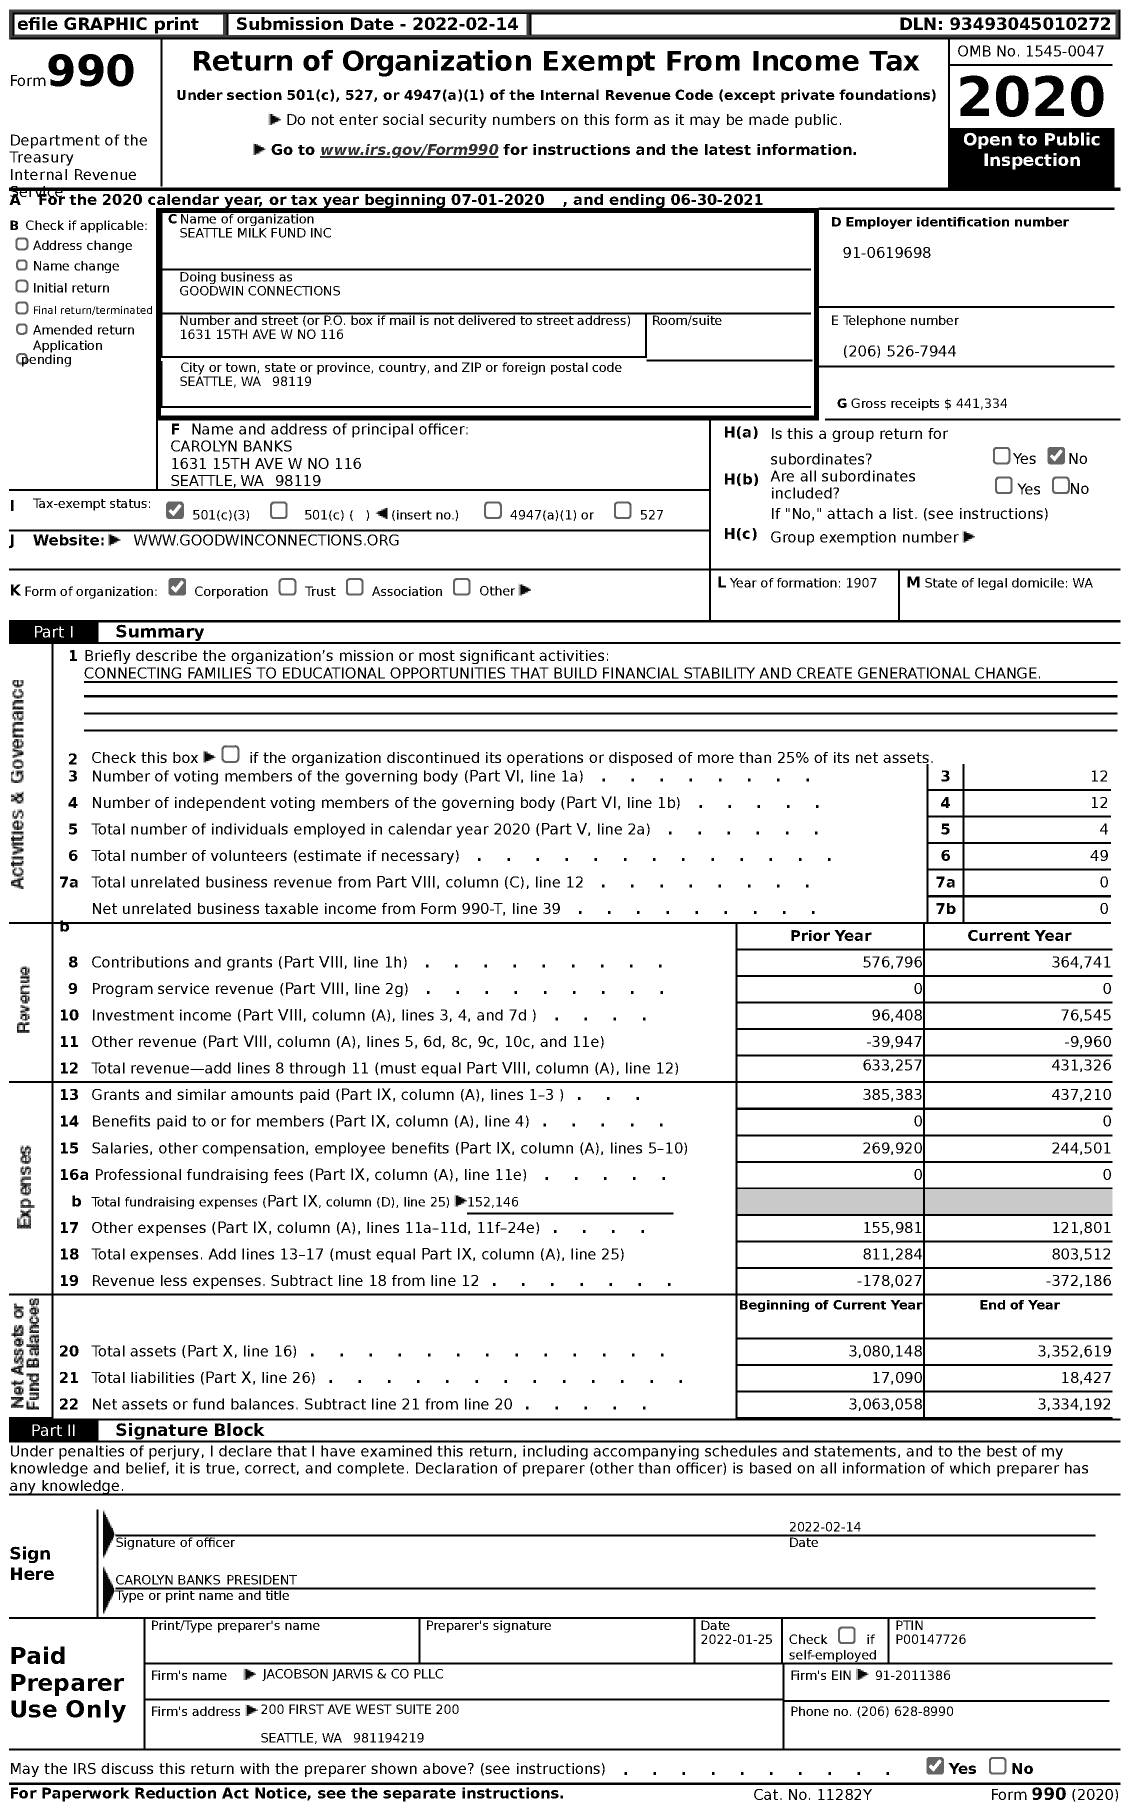 Image of first page of 2020 Form 990 for Goodwin Connections